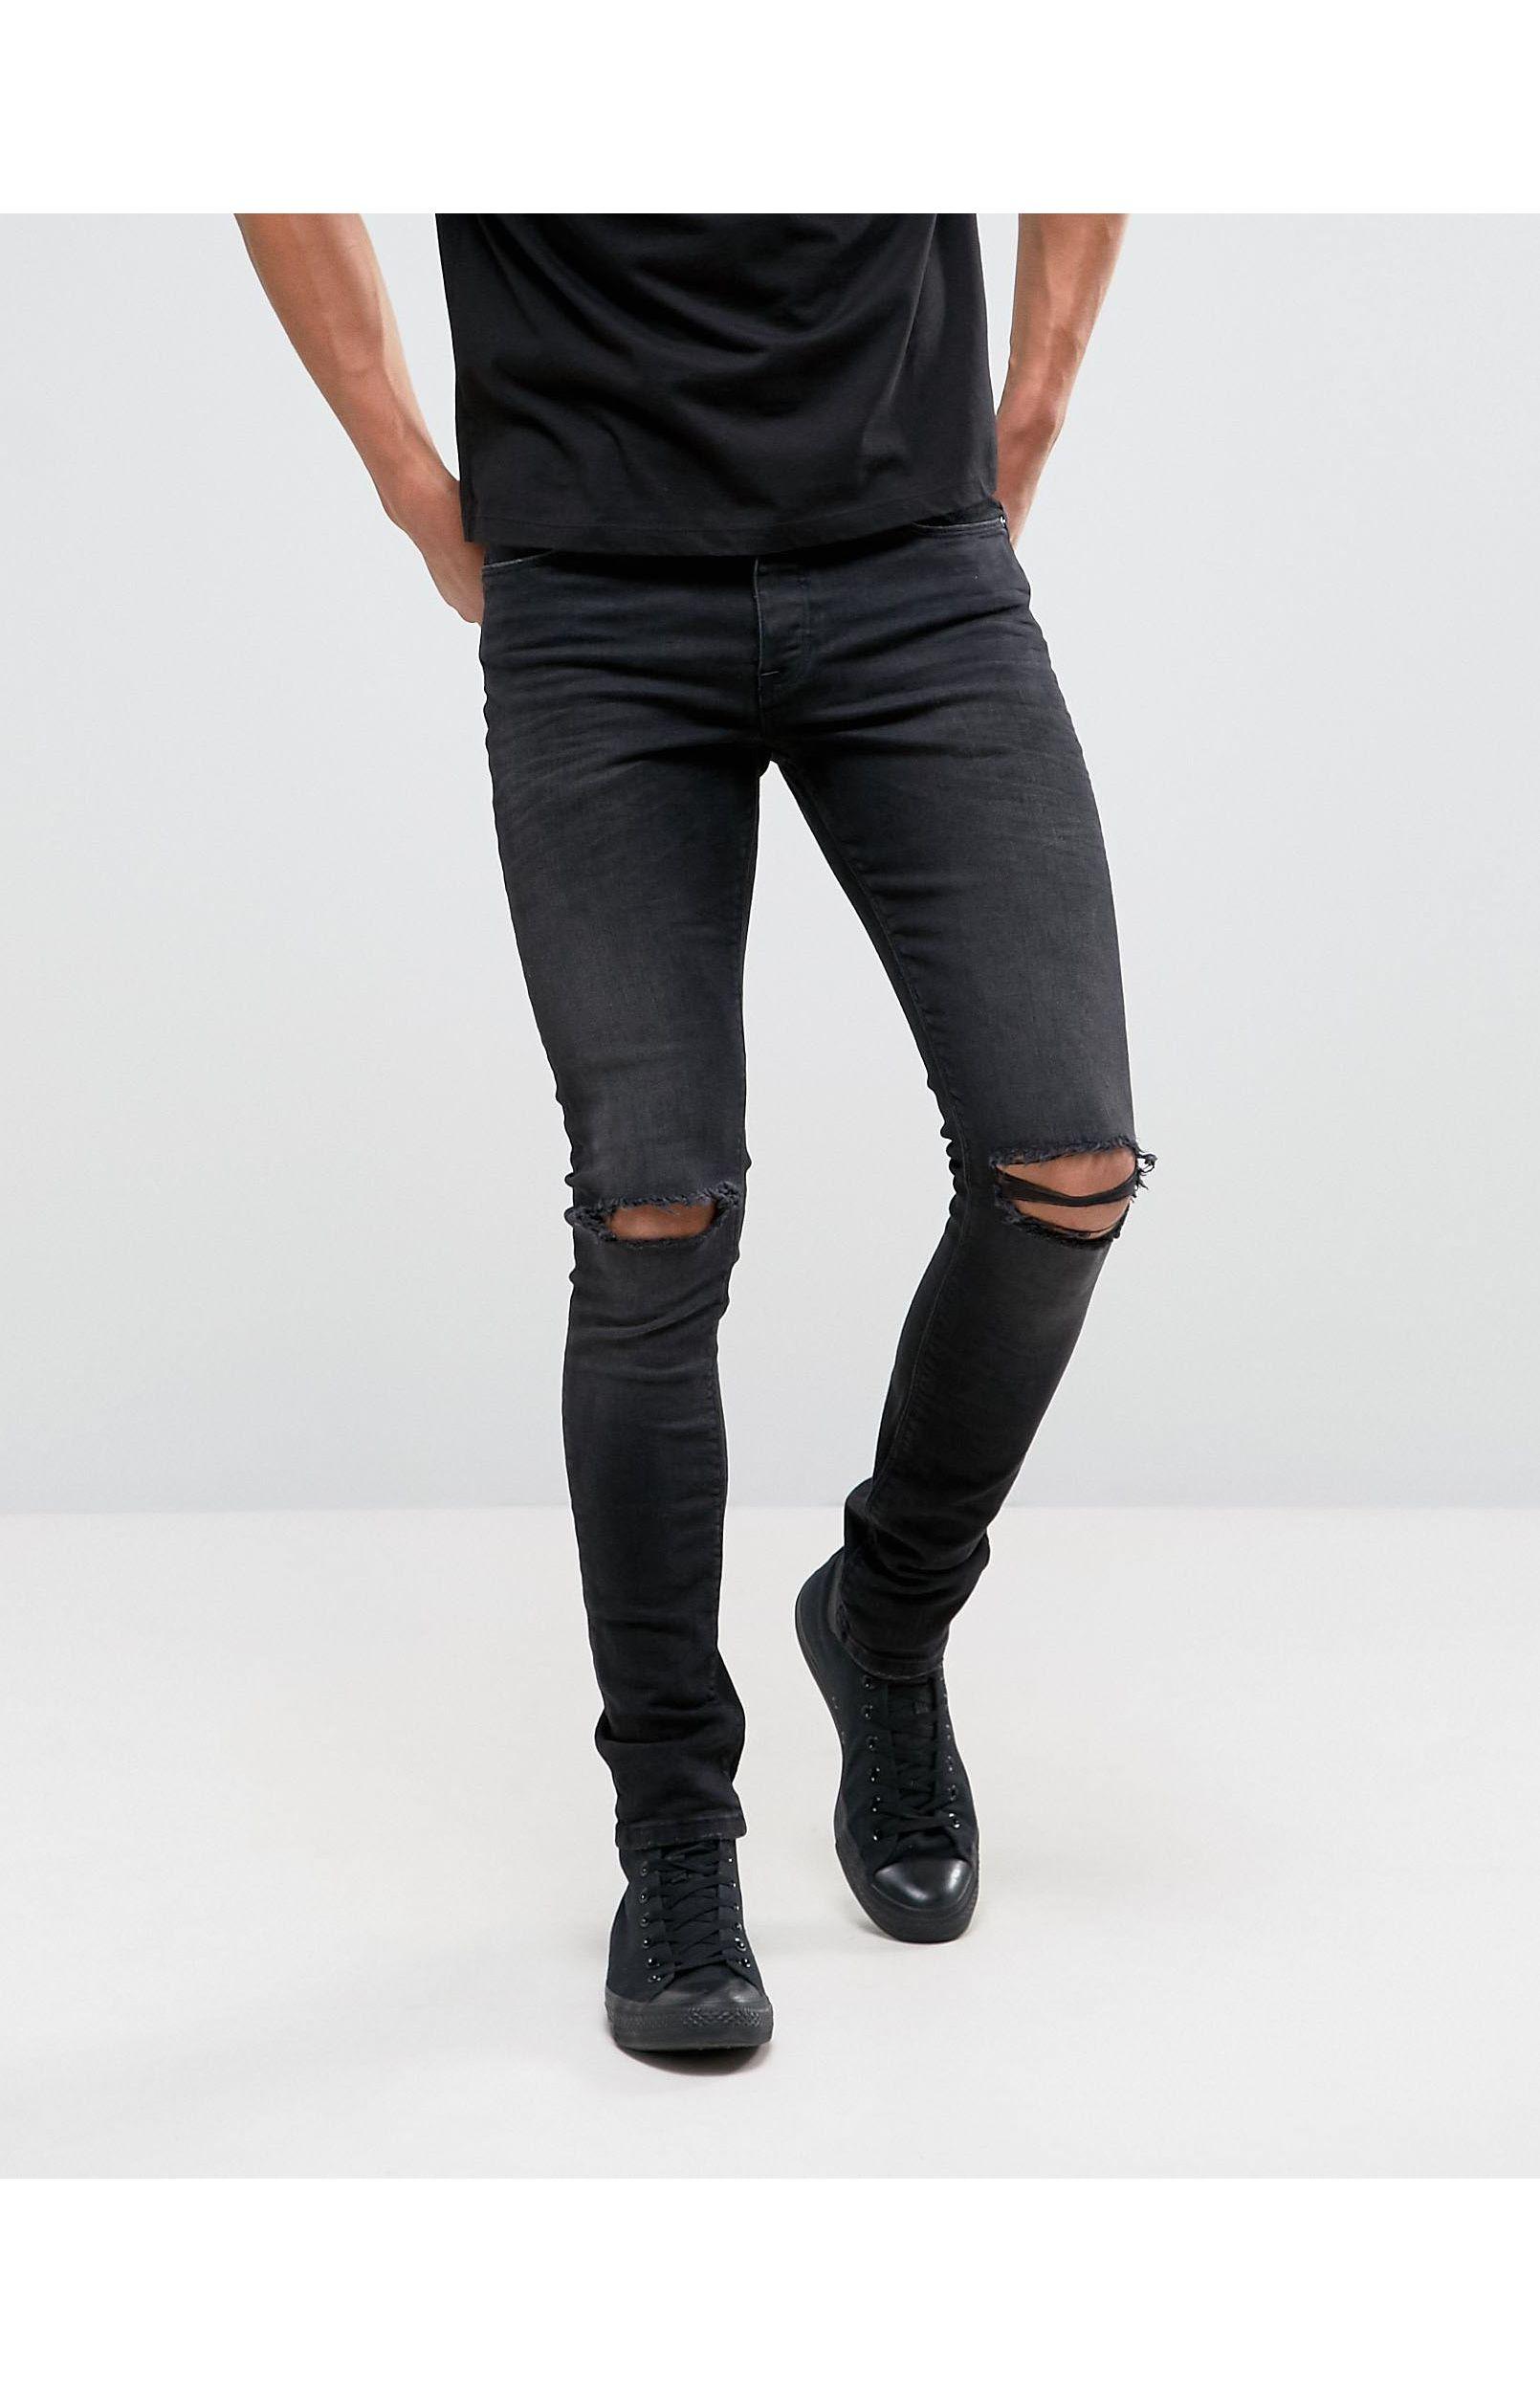 ASOS Denim Super Skinny 12.5oz Jeans With Knee Rips In Washed Black for ...